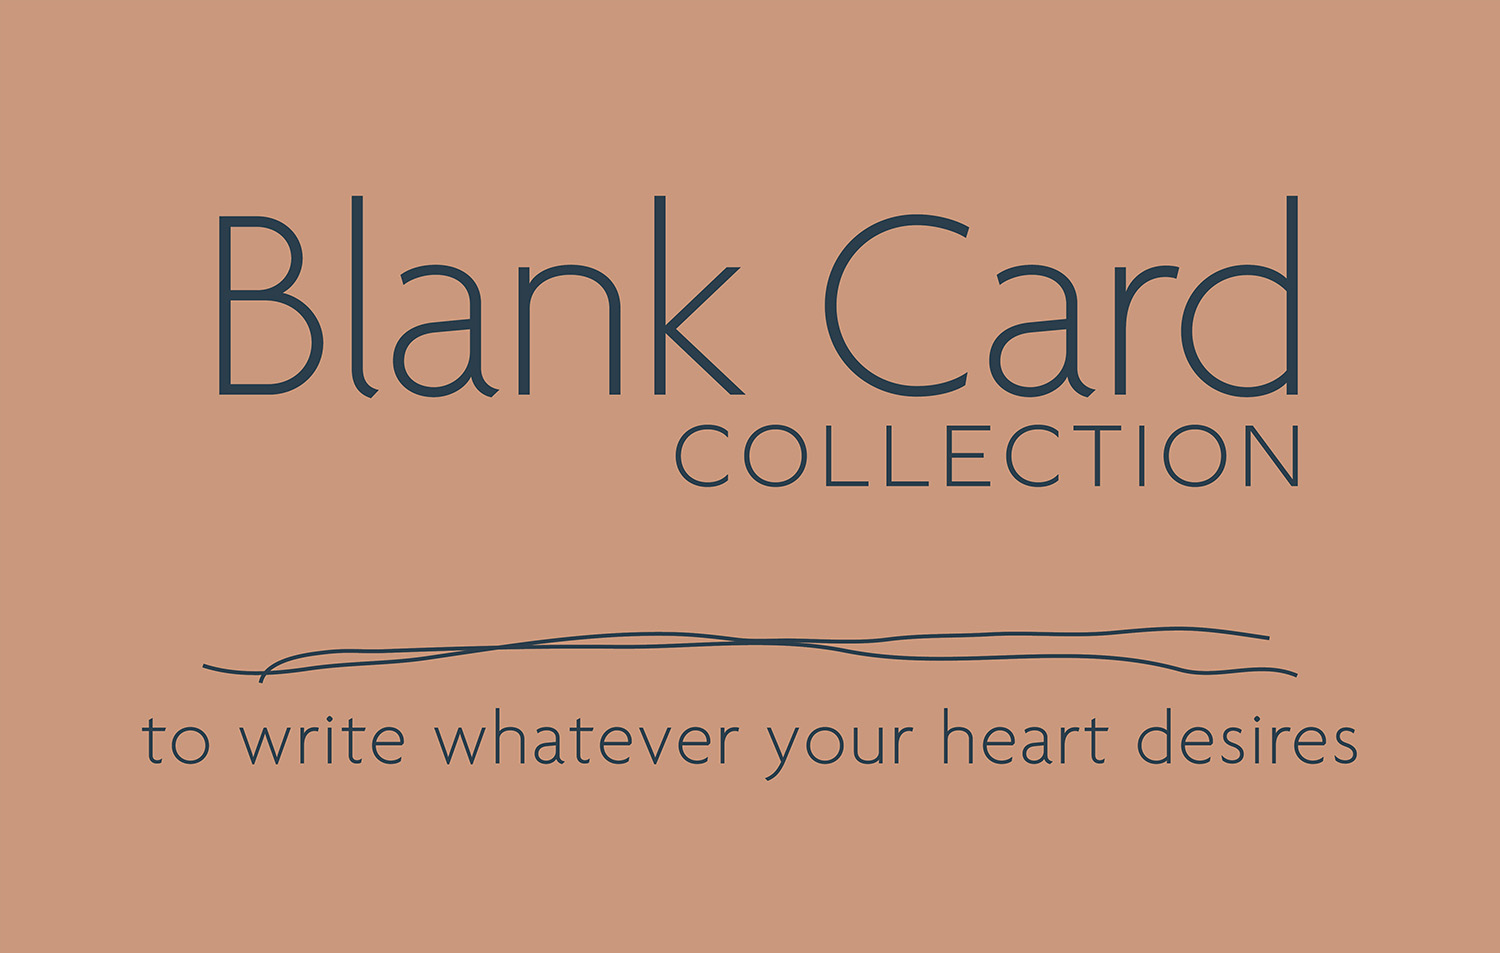 light coral background with text that says"Blank card collection - to write whatever your heart desires."